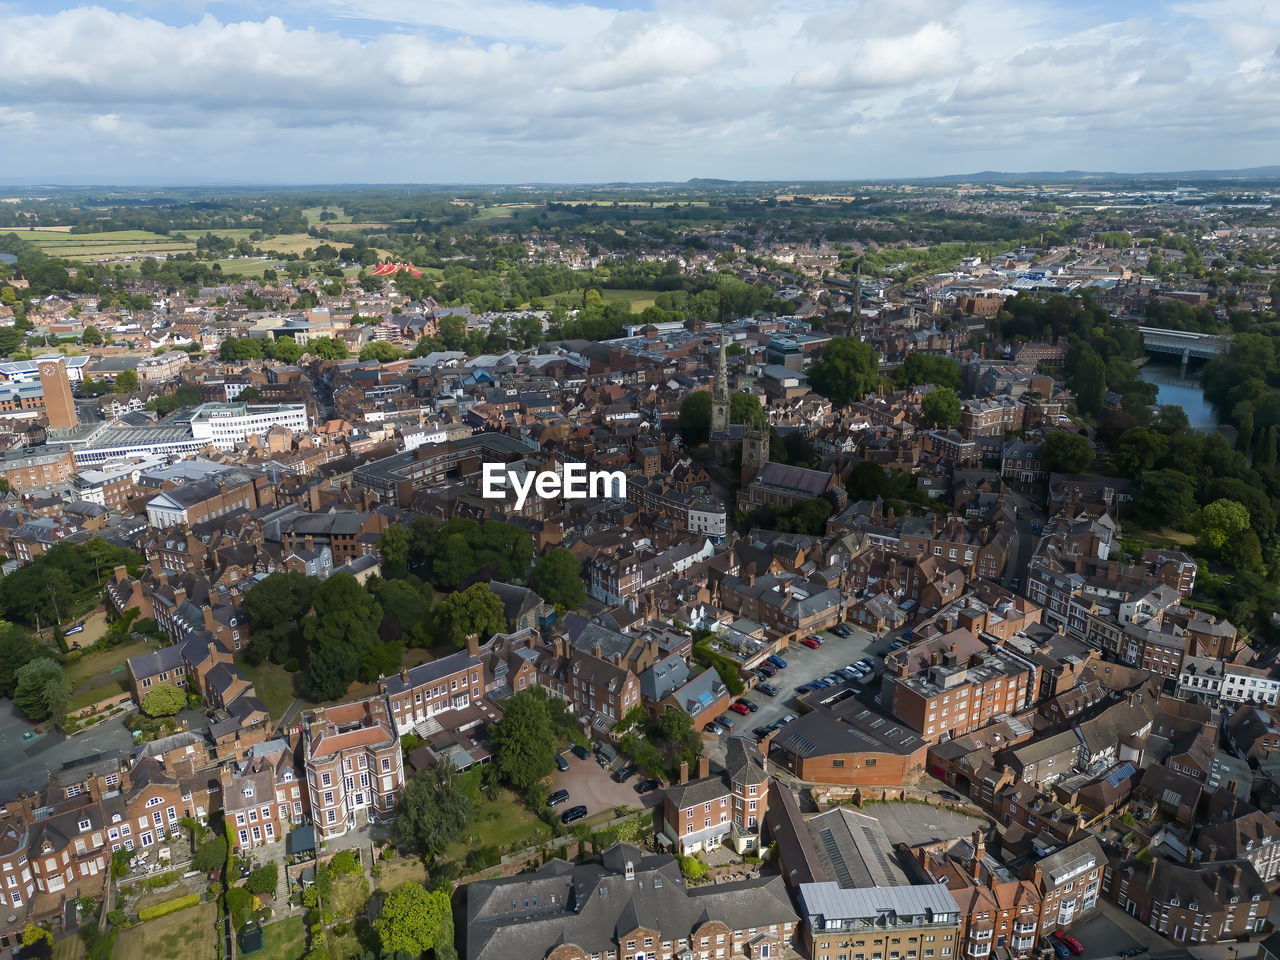 An aerial view of the market town of shrewsbury in shropshire, uk